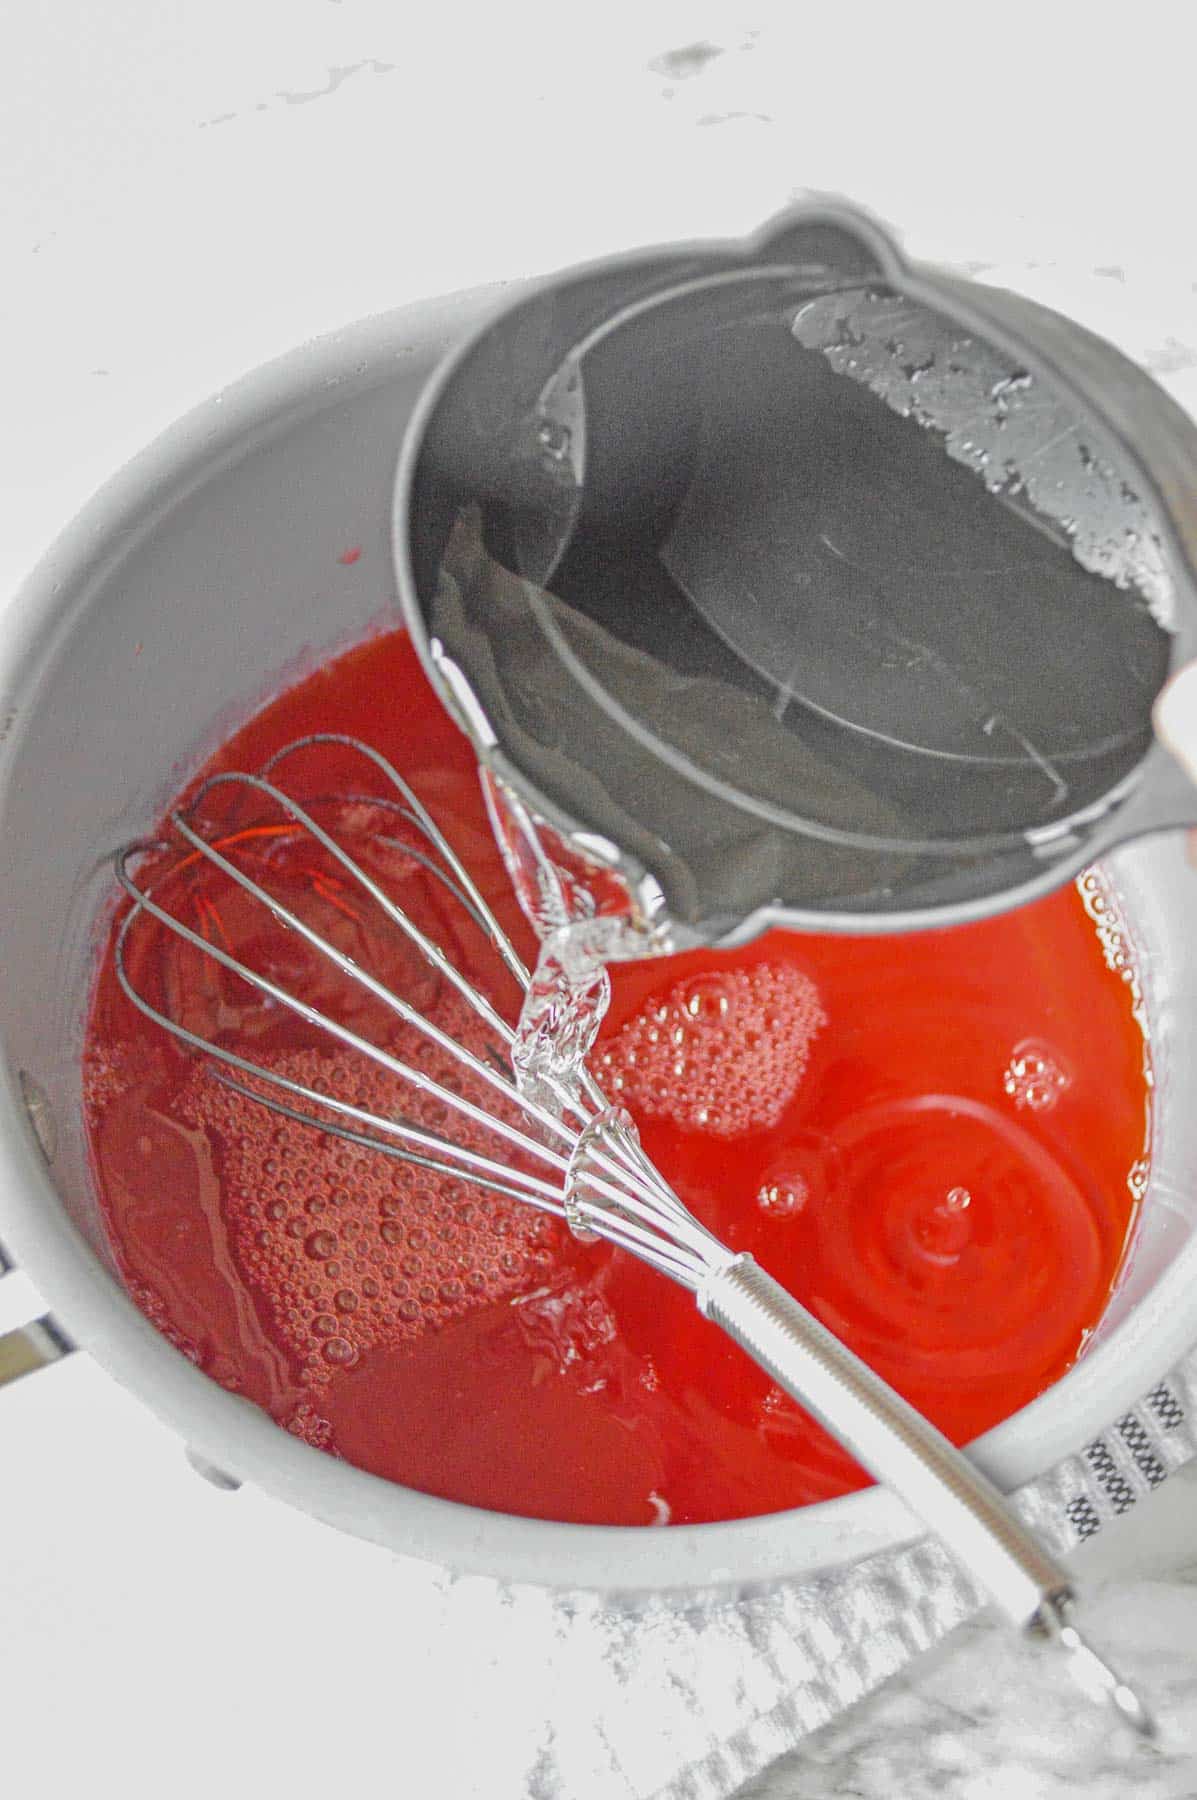 ½ cup of cold water being poured into medium sauce pan of strawberry jello.